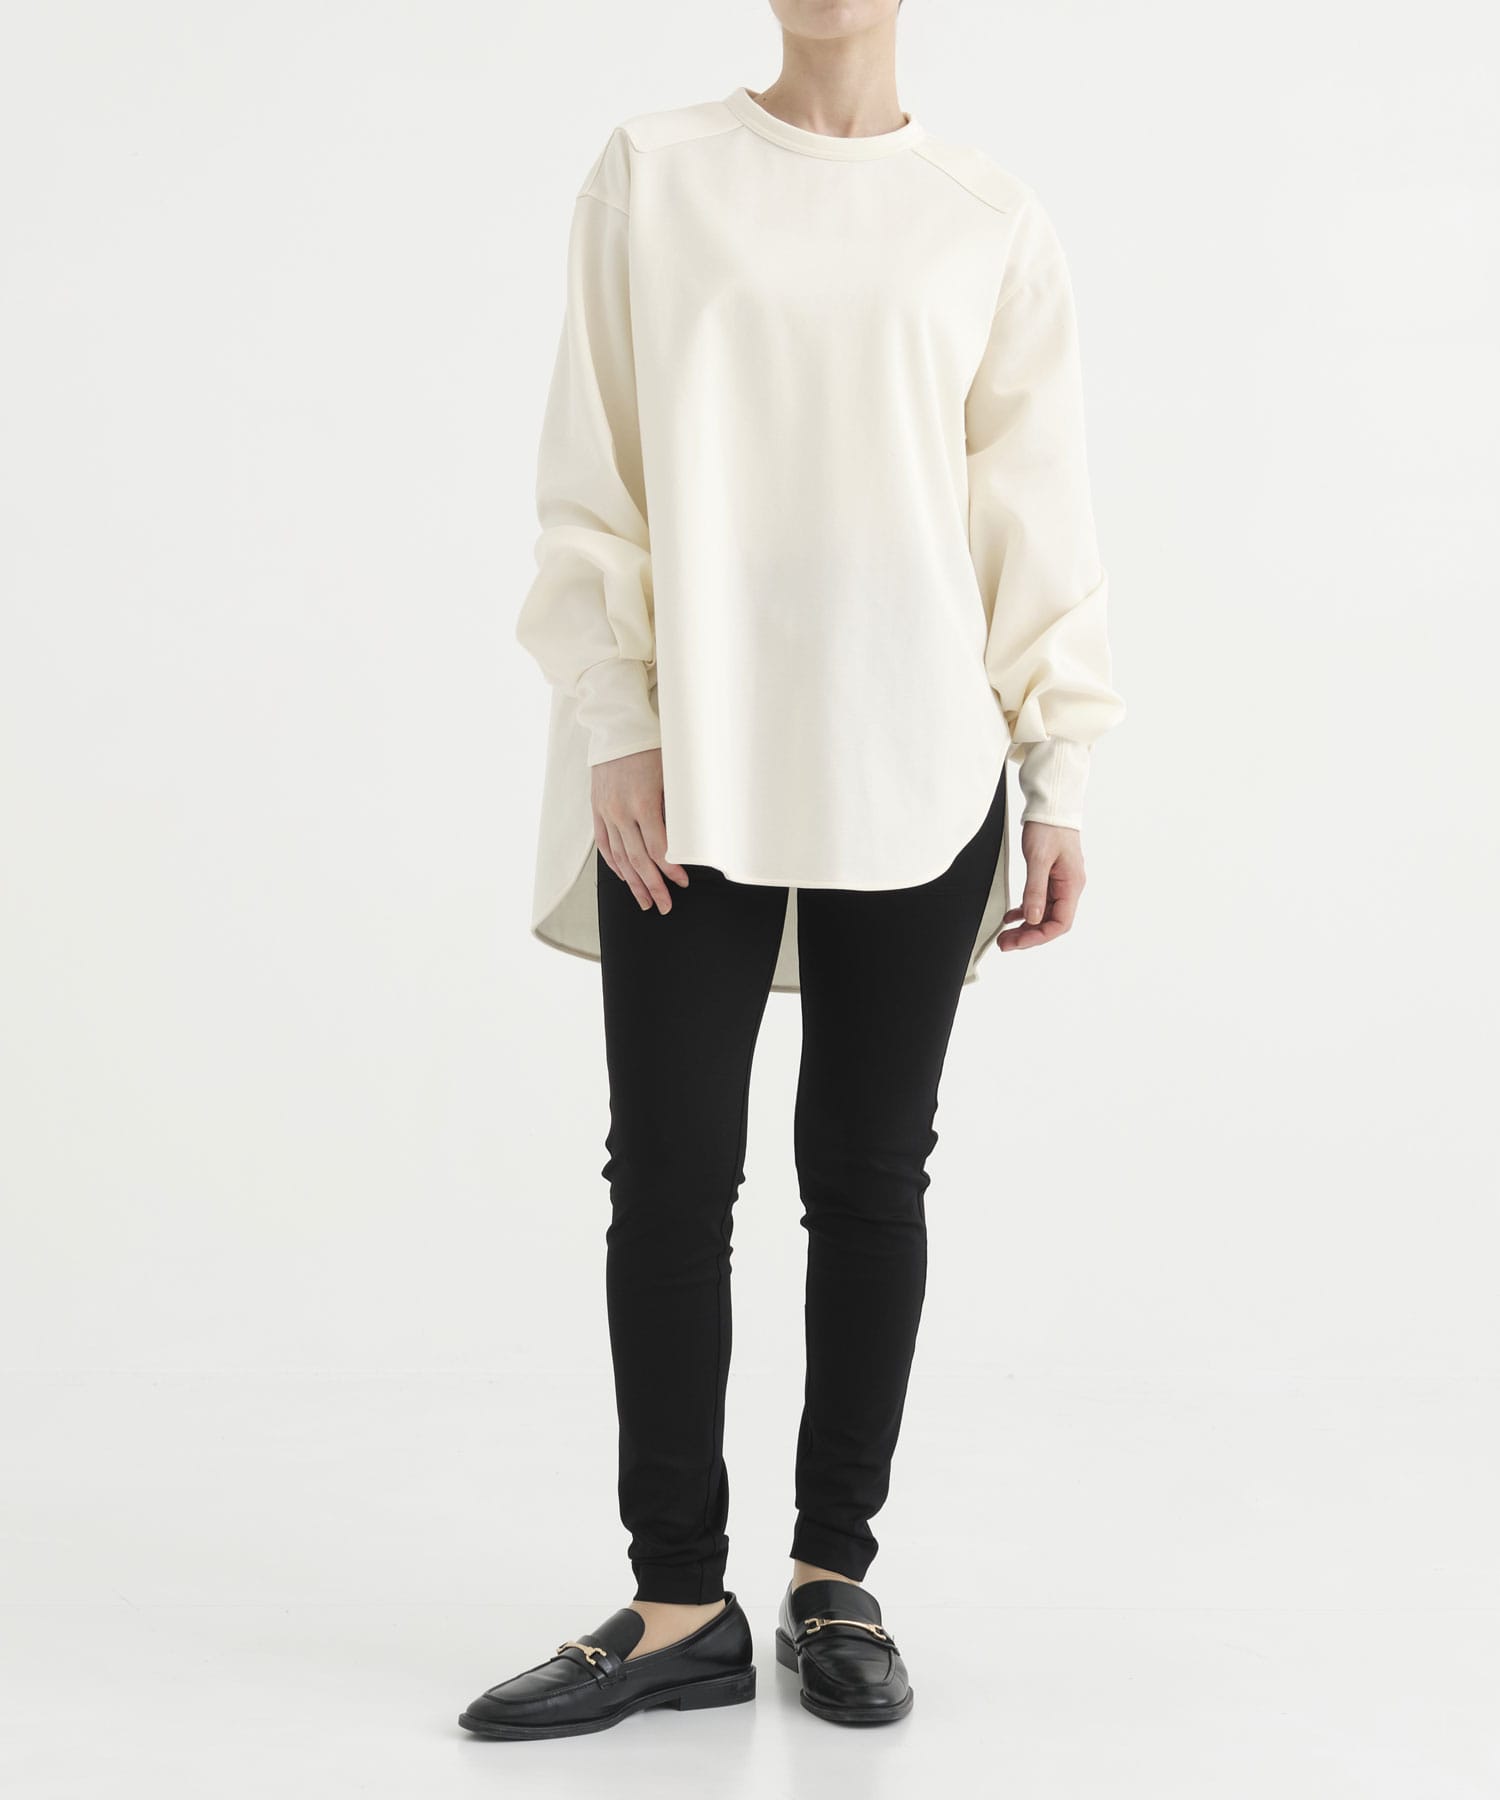 THE LONG SLEEVE COMAND T-SHIRT THE RERACS